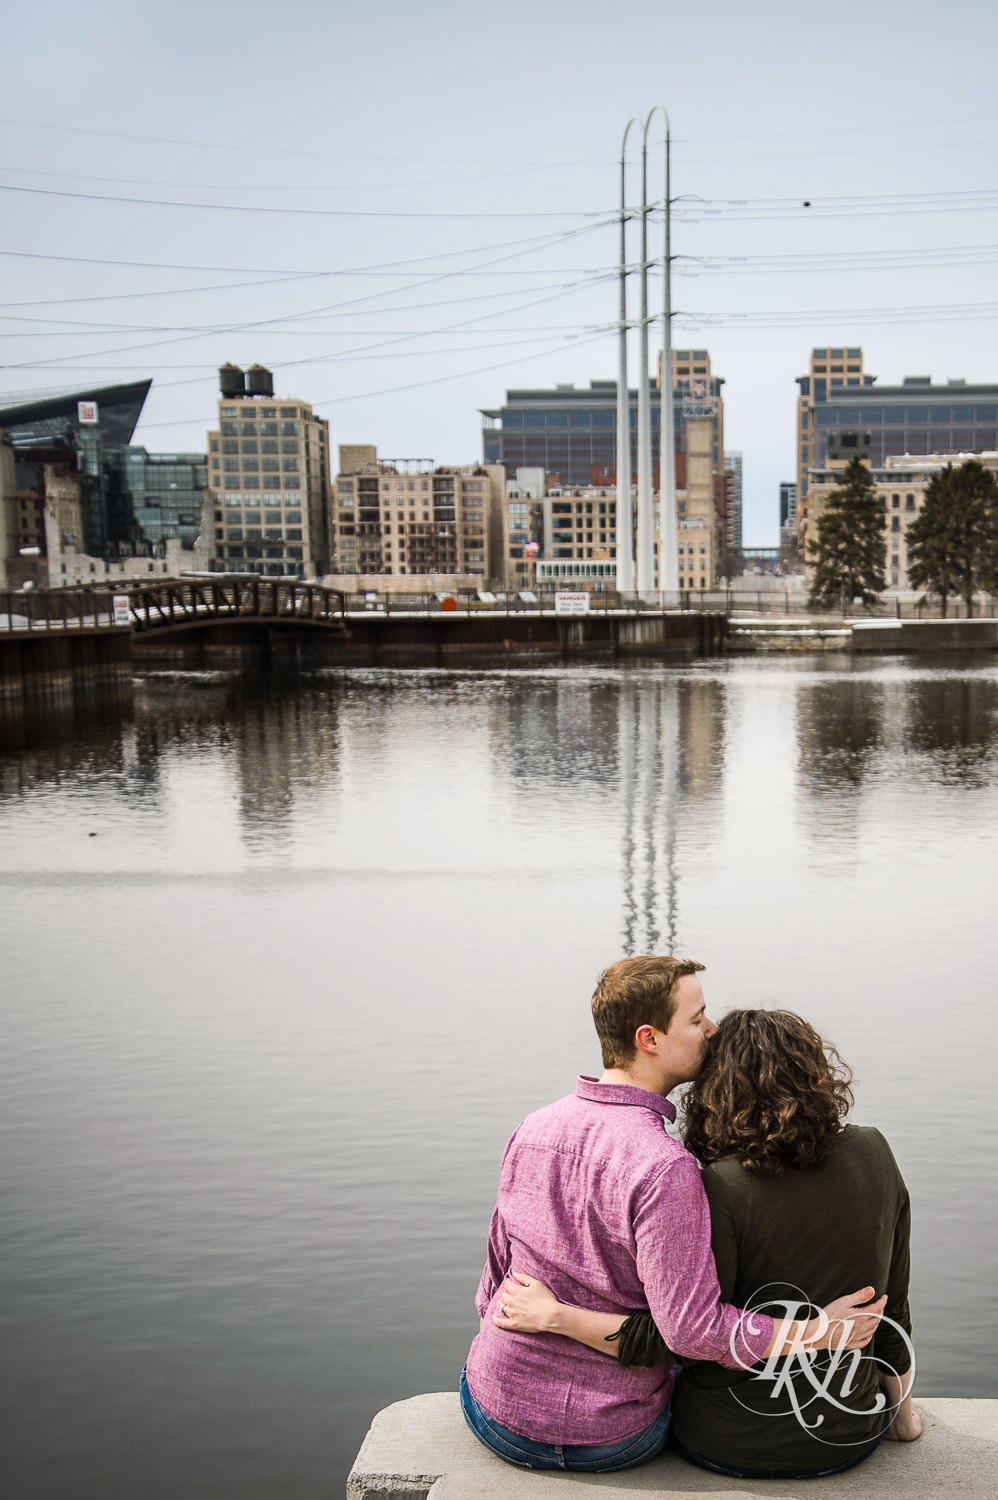 Man and woman smile in front of the river and Minneapolis skyline during St. Anthony Main engagement photos.